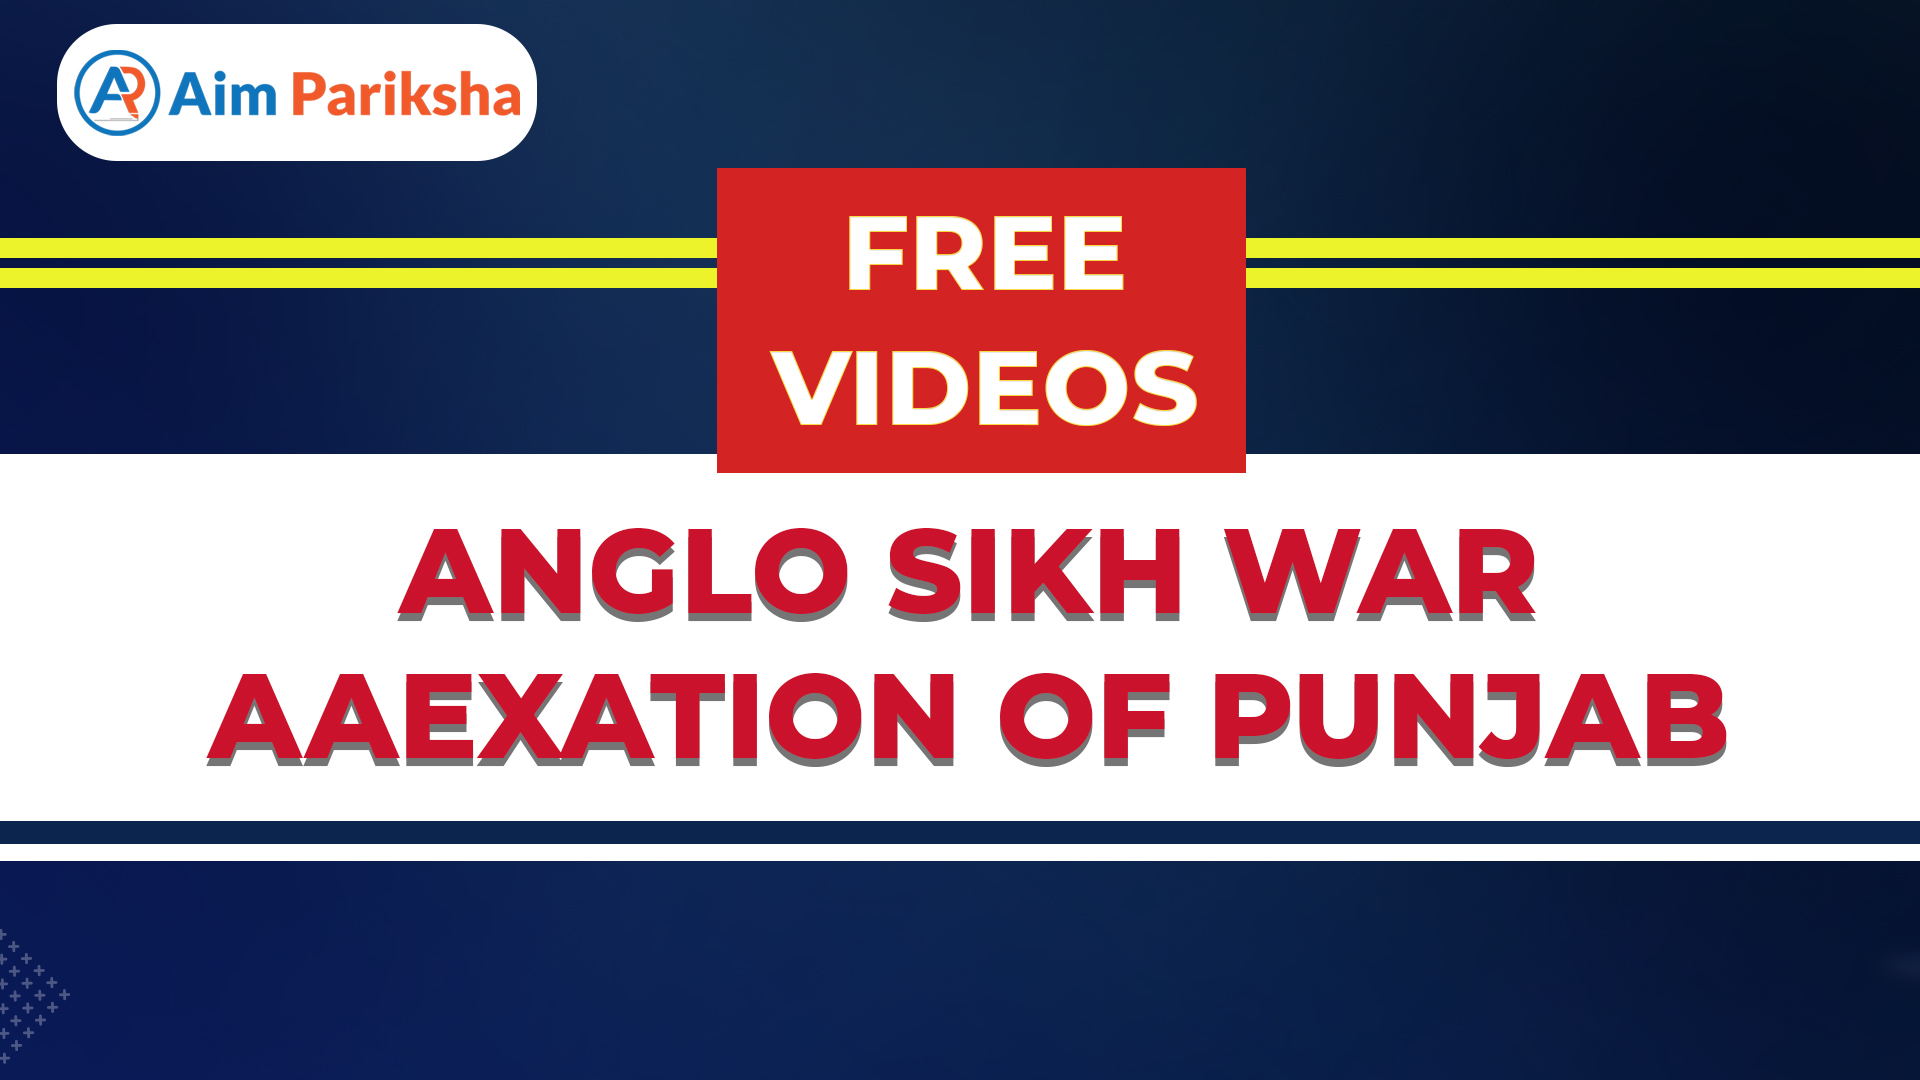 ANGLO SIKH WAR ANNEXATION OF PUNJAB